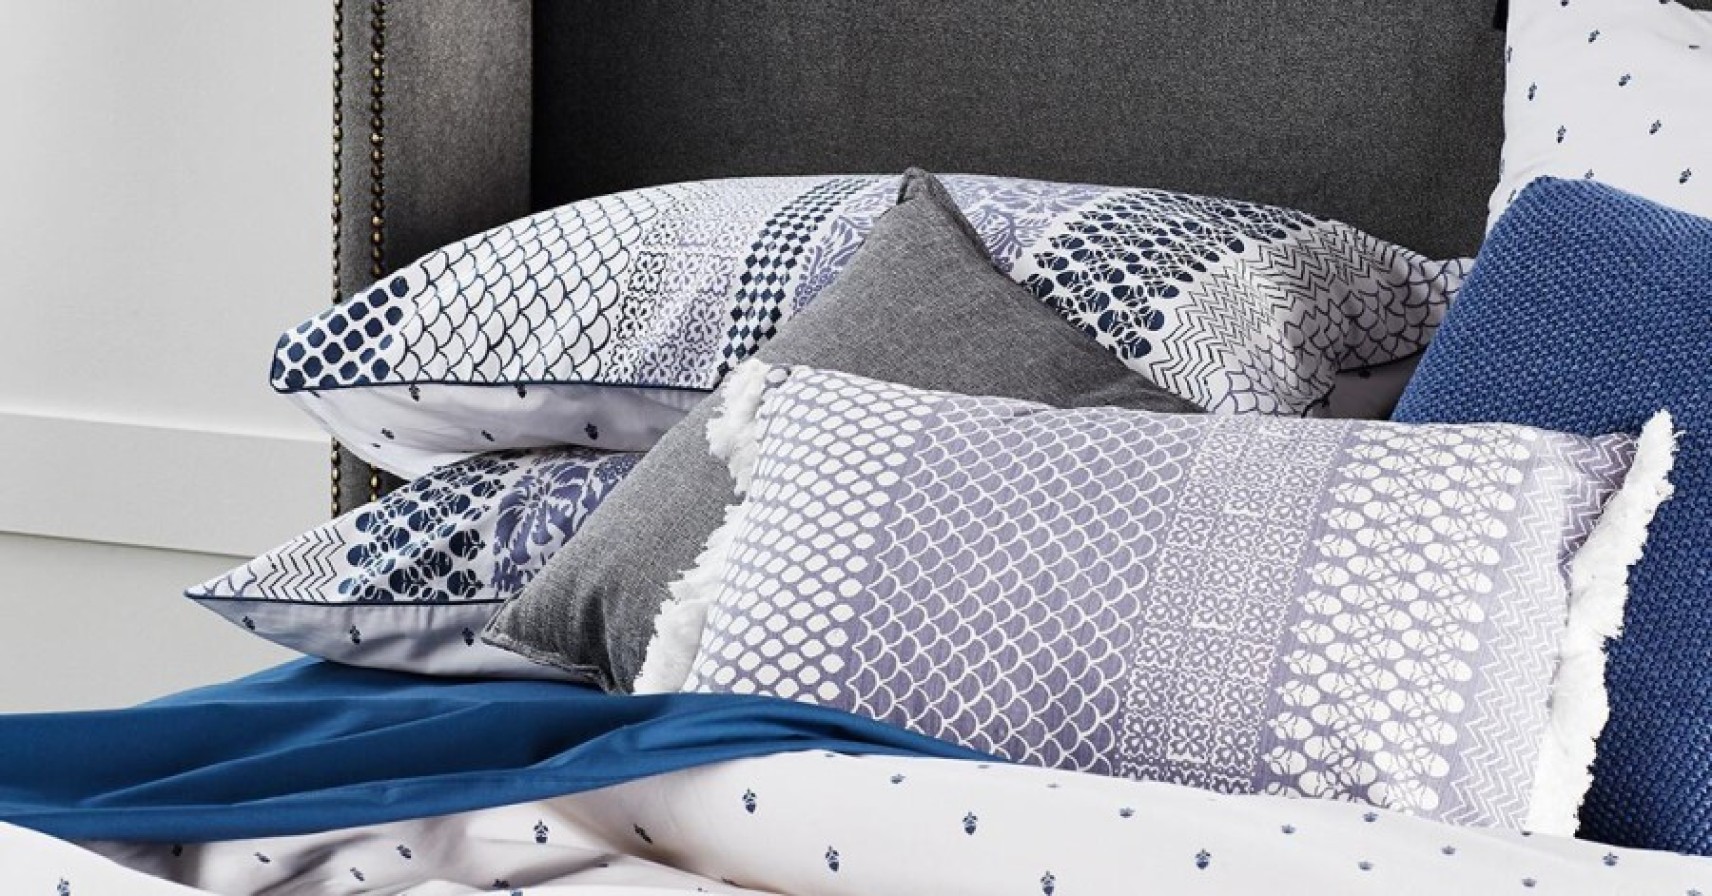 https://www.bedshed.com.au/img/containers/blogs/how-often-should-you-change-your-pillow/pillows.jpg/c6f62277e8f33b10f3ba31159595c406.jpg